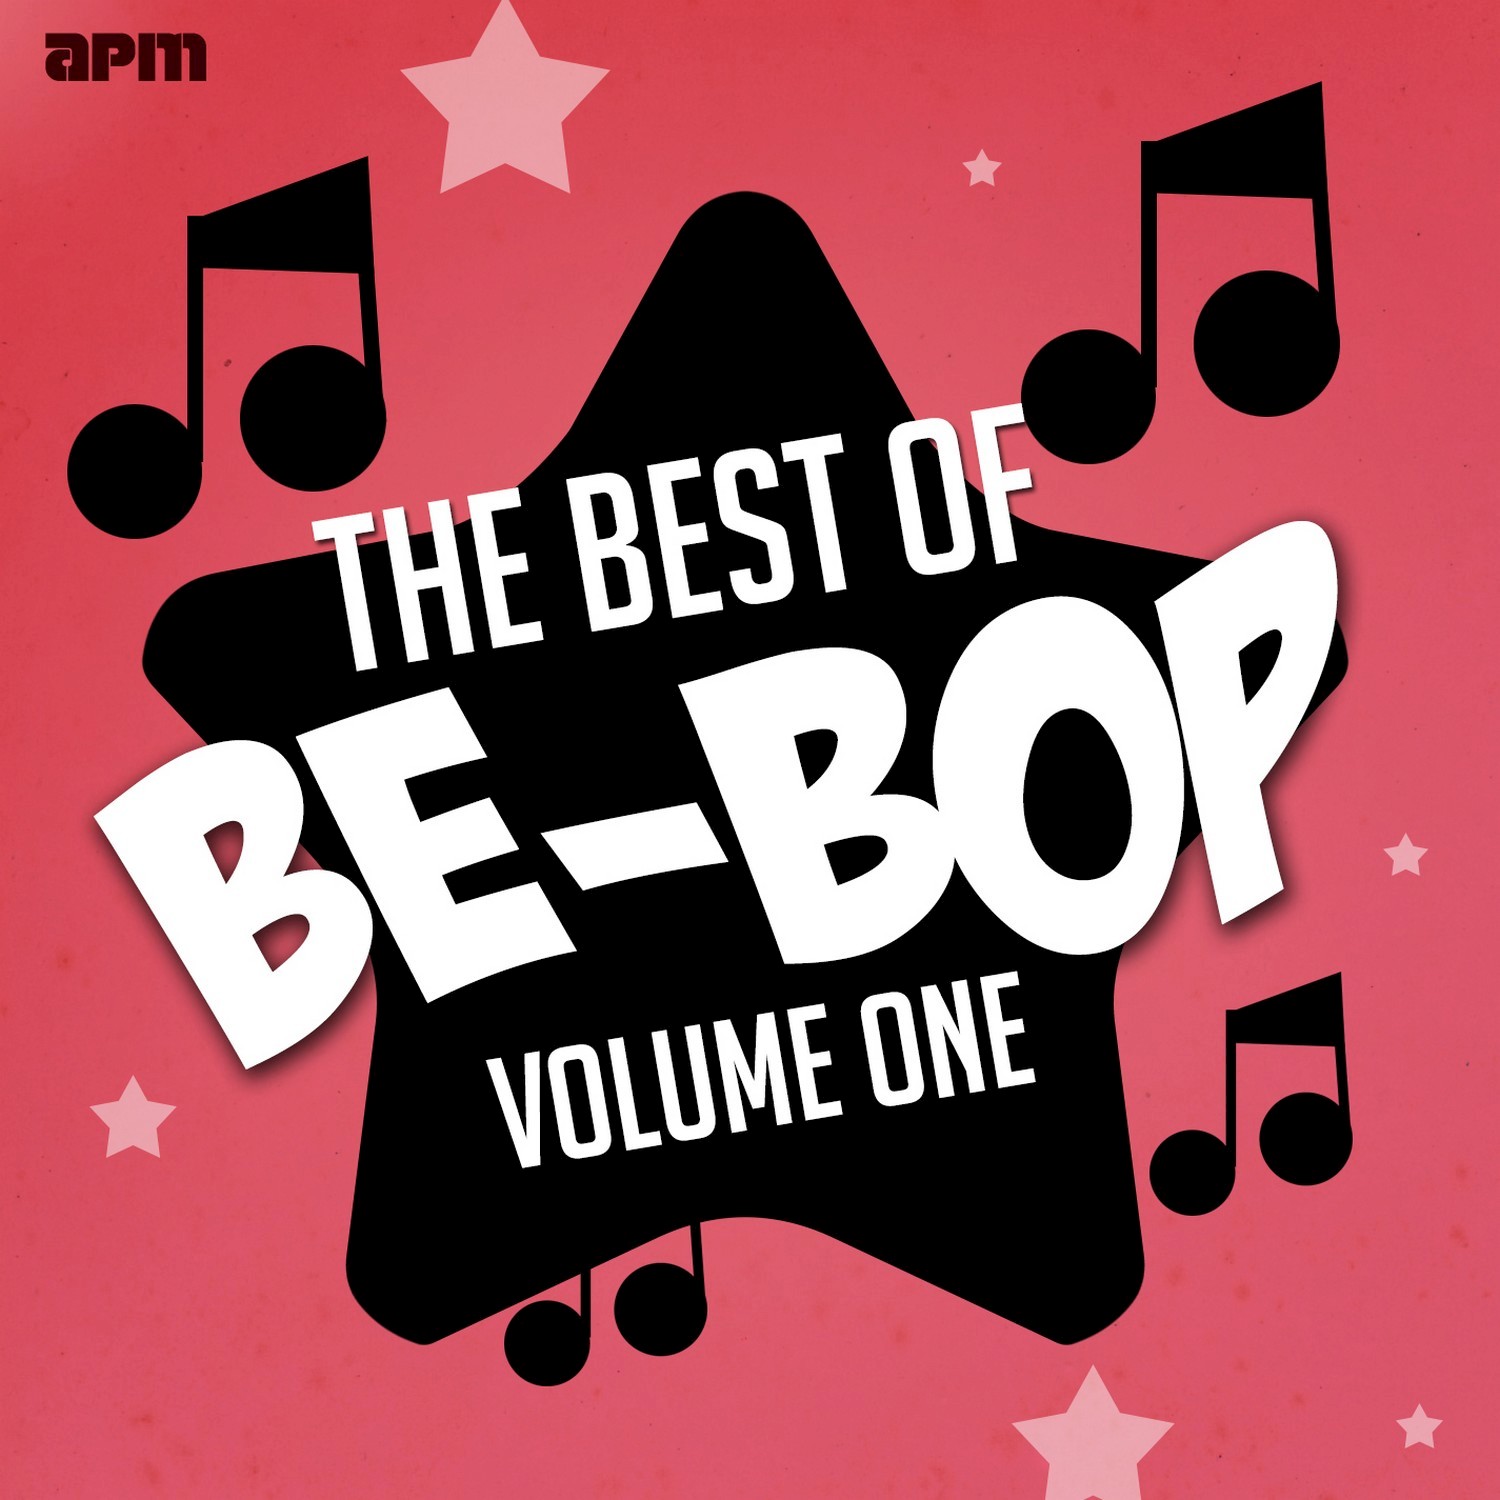 The Best of Be Bop, Vol. 1